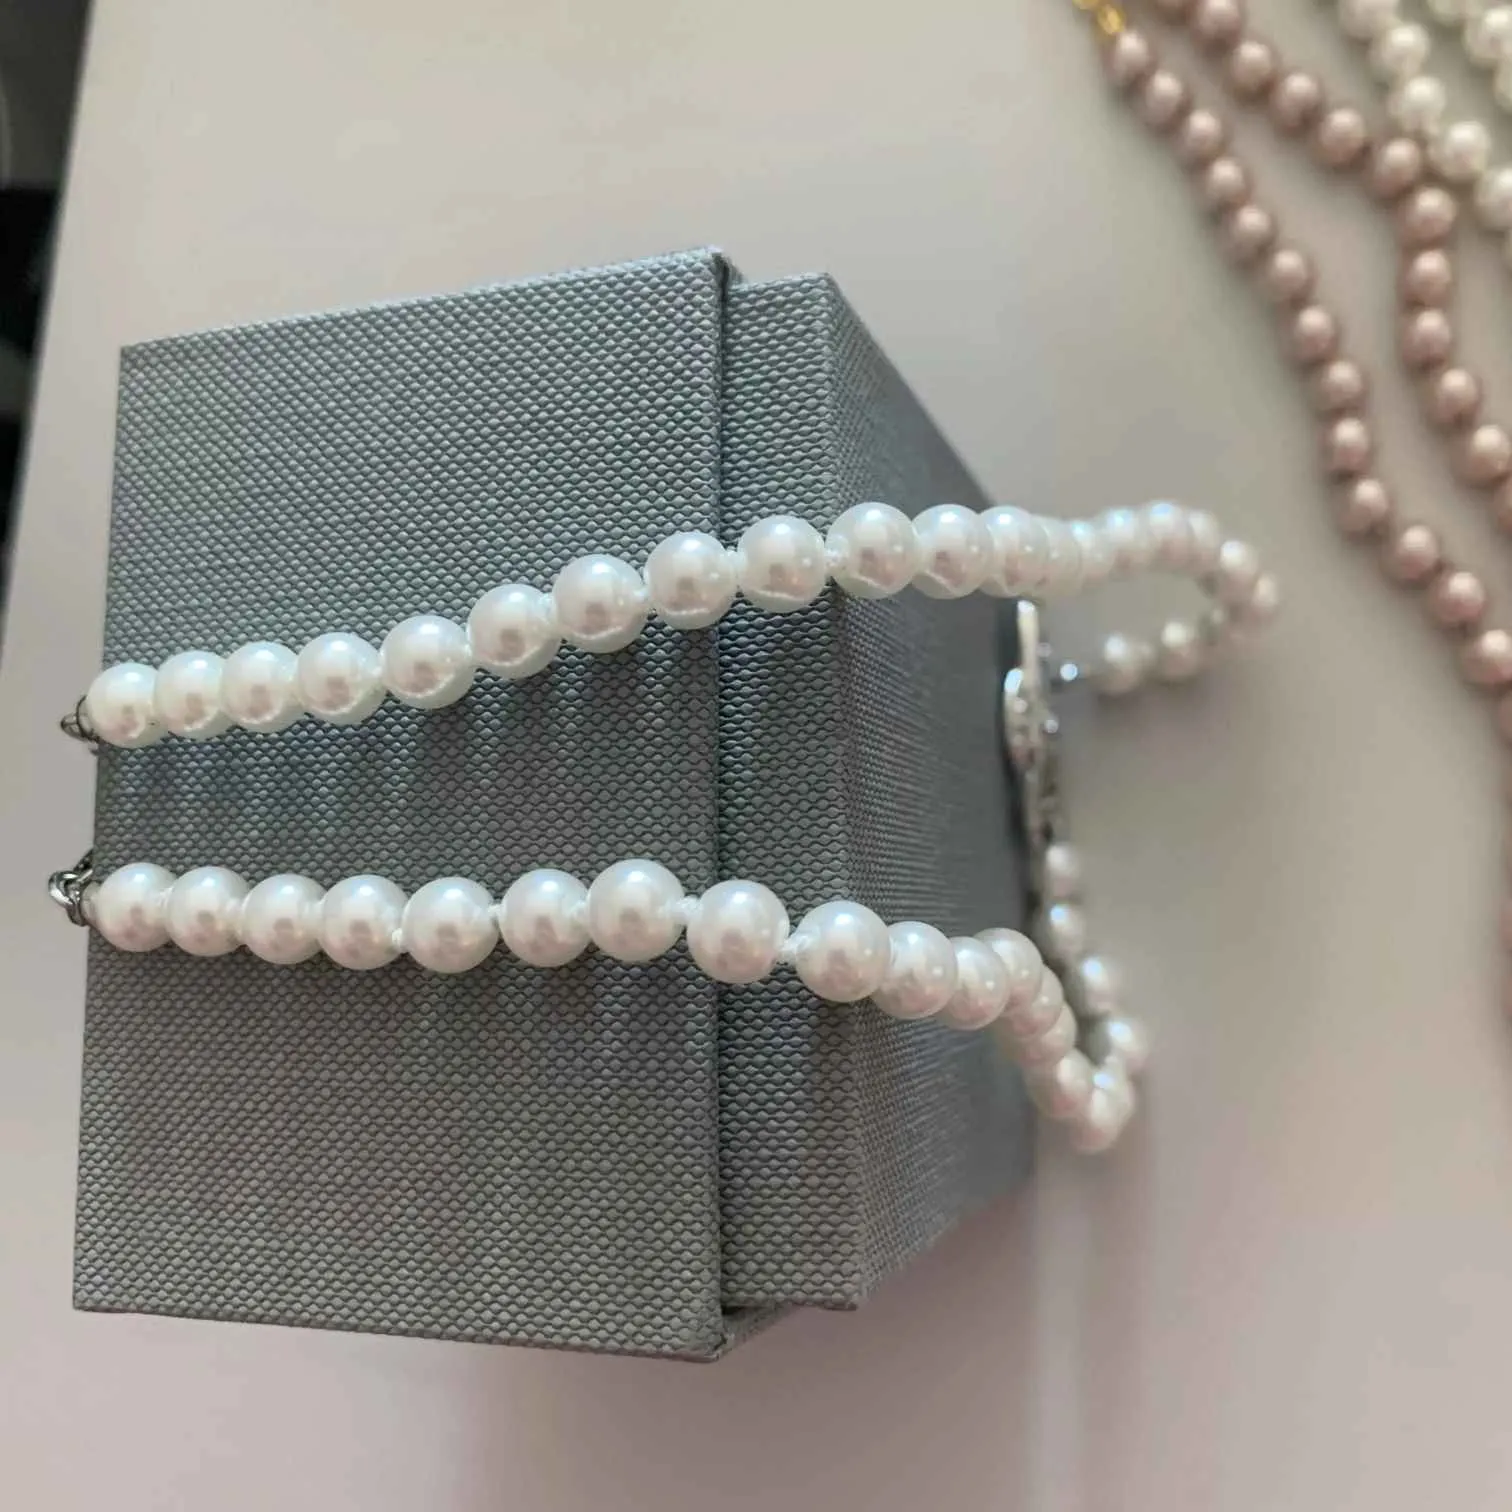 New Fashionable female necklace brand Pearl Chain Planet Necklace Saturn Satellite Clavicle Punk Atmosphere248C